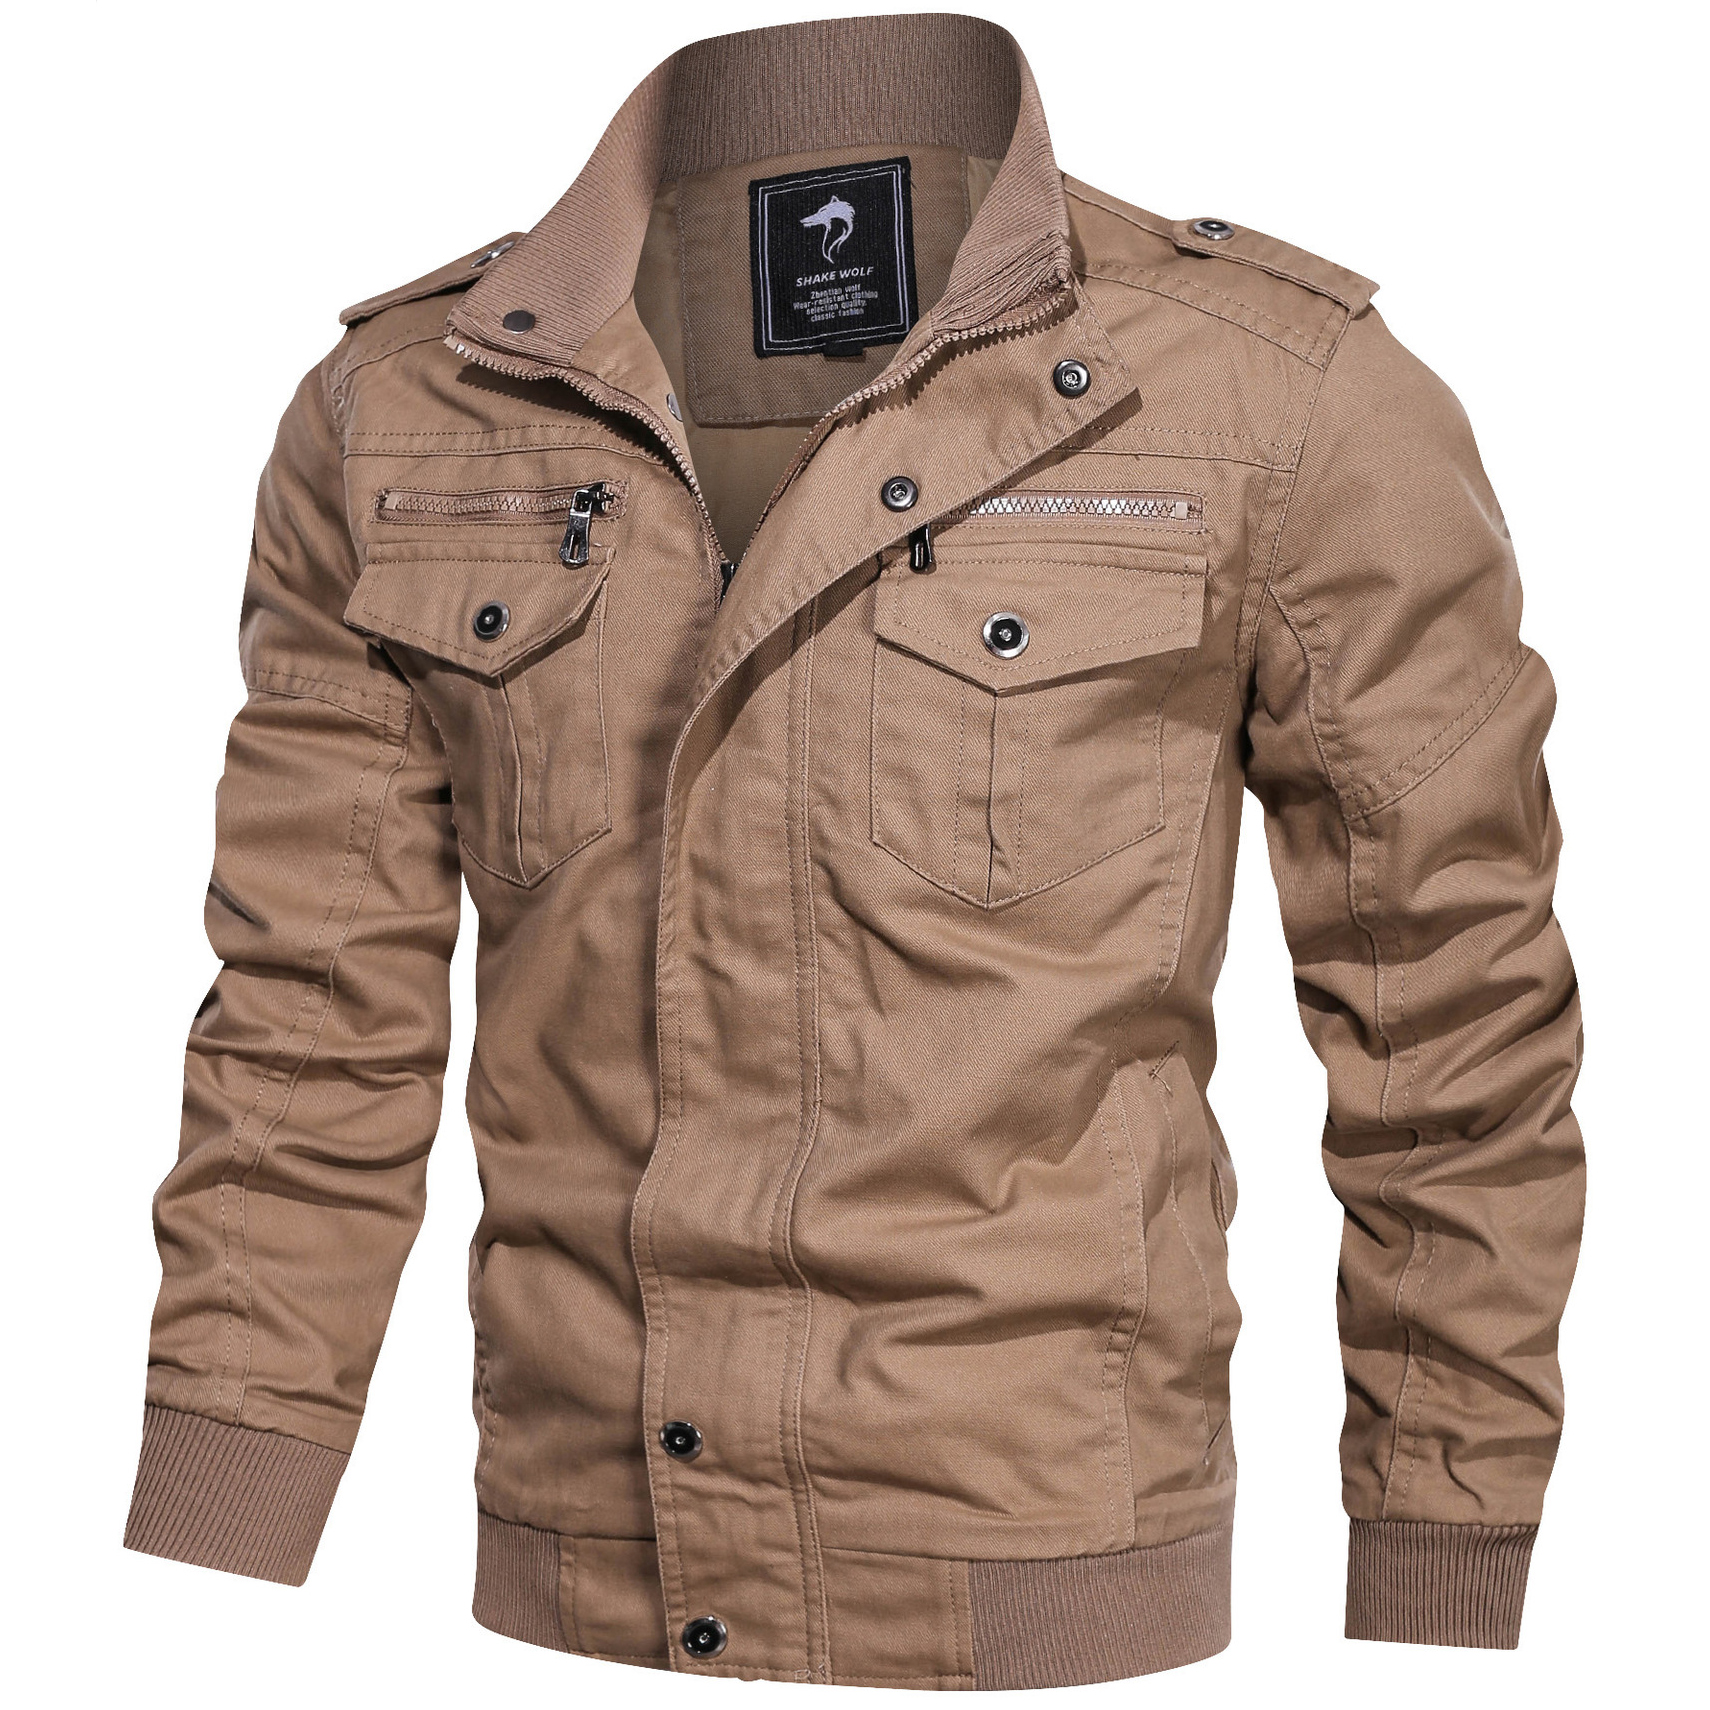 Men's Outdoor Warm Breathable Chic Multi-pocket Cotton Washed Cargo Jacket